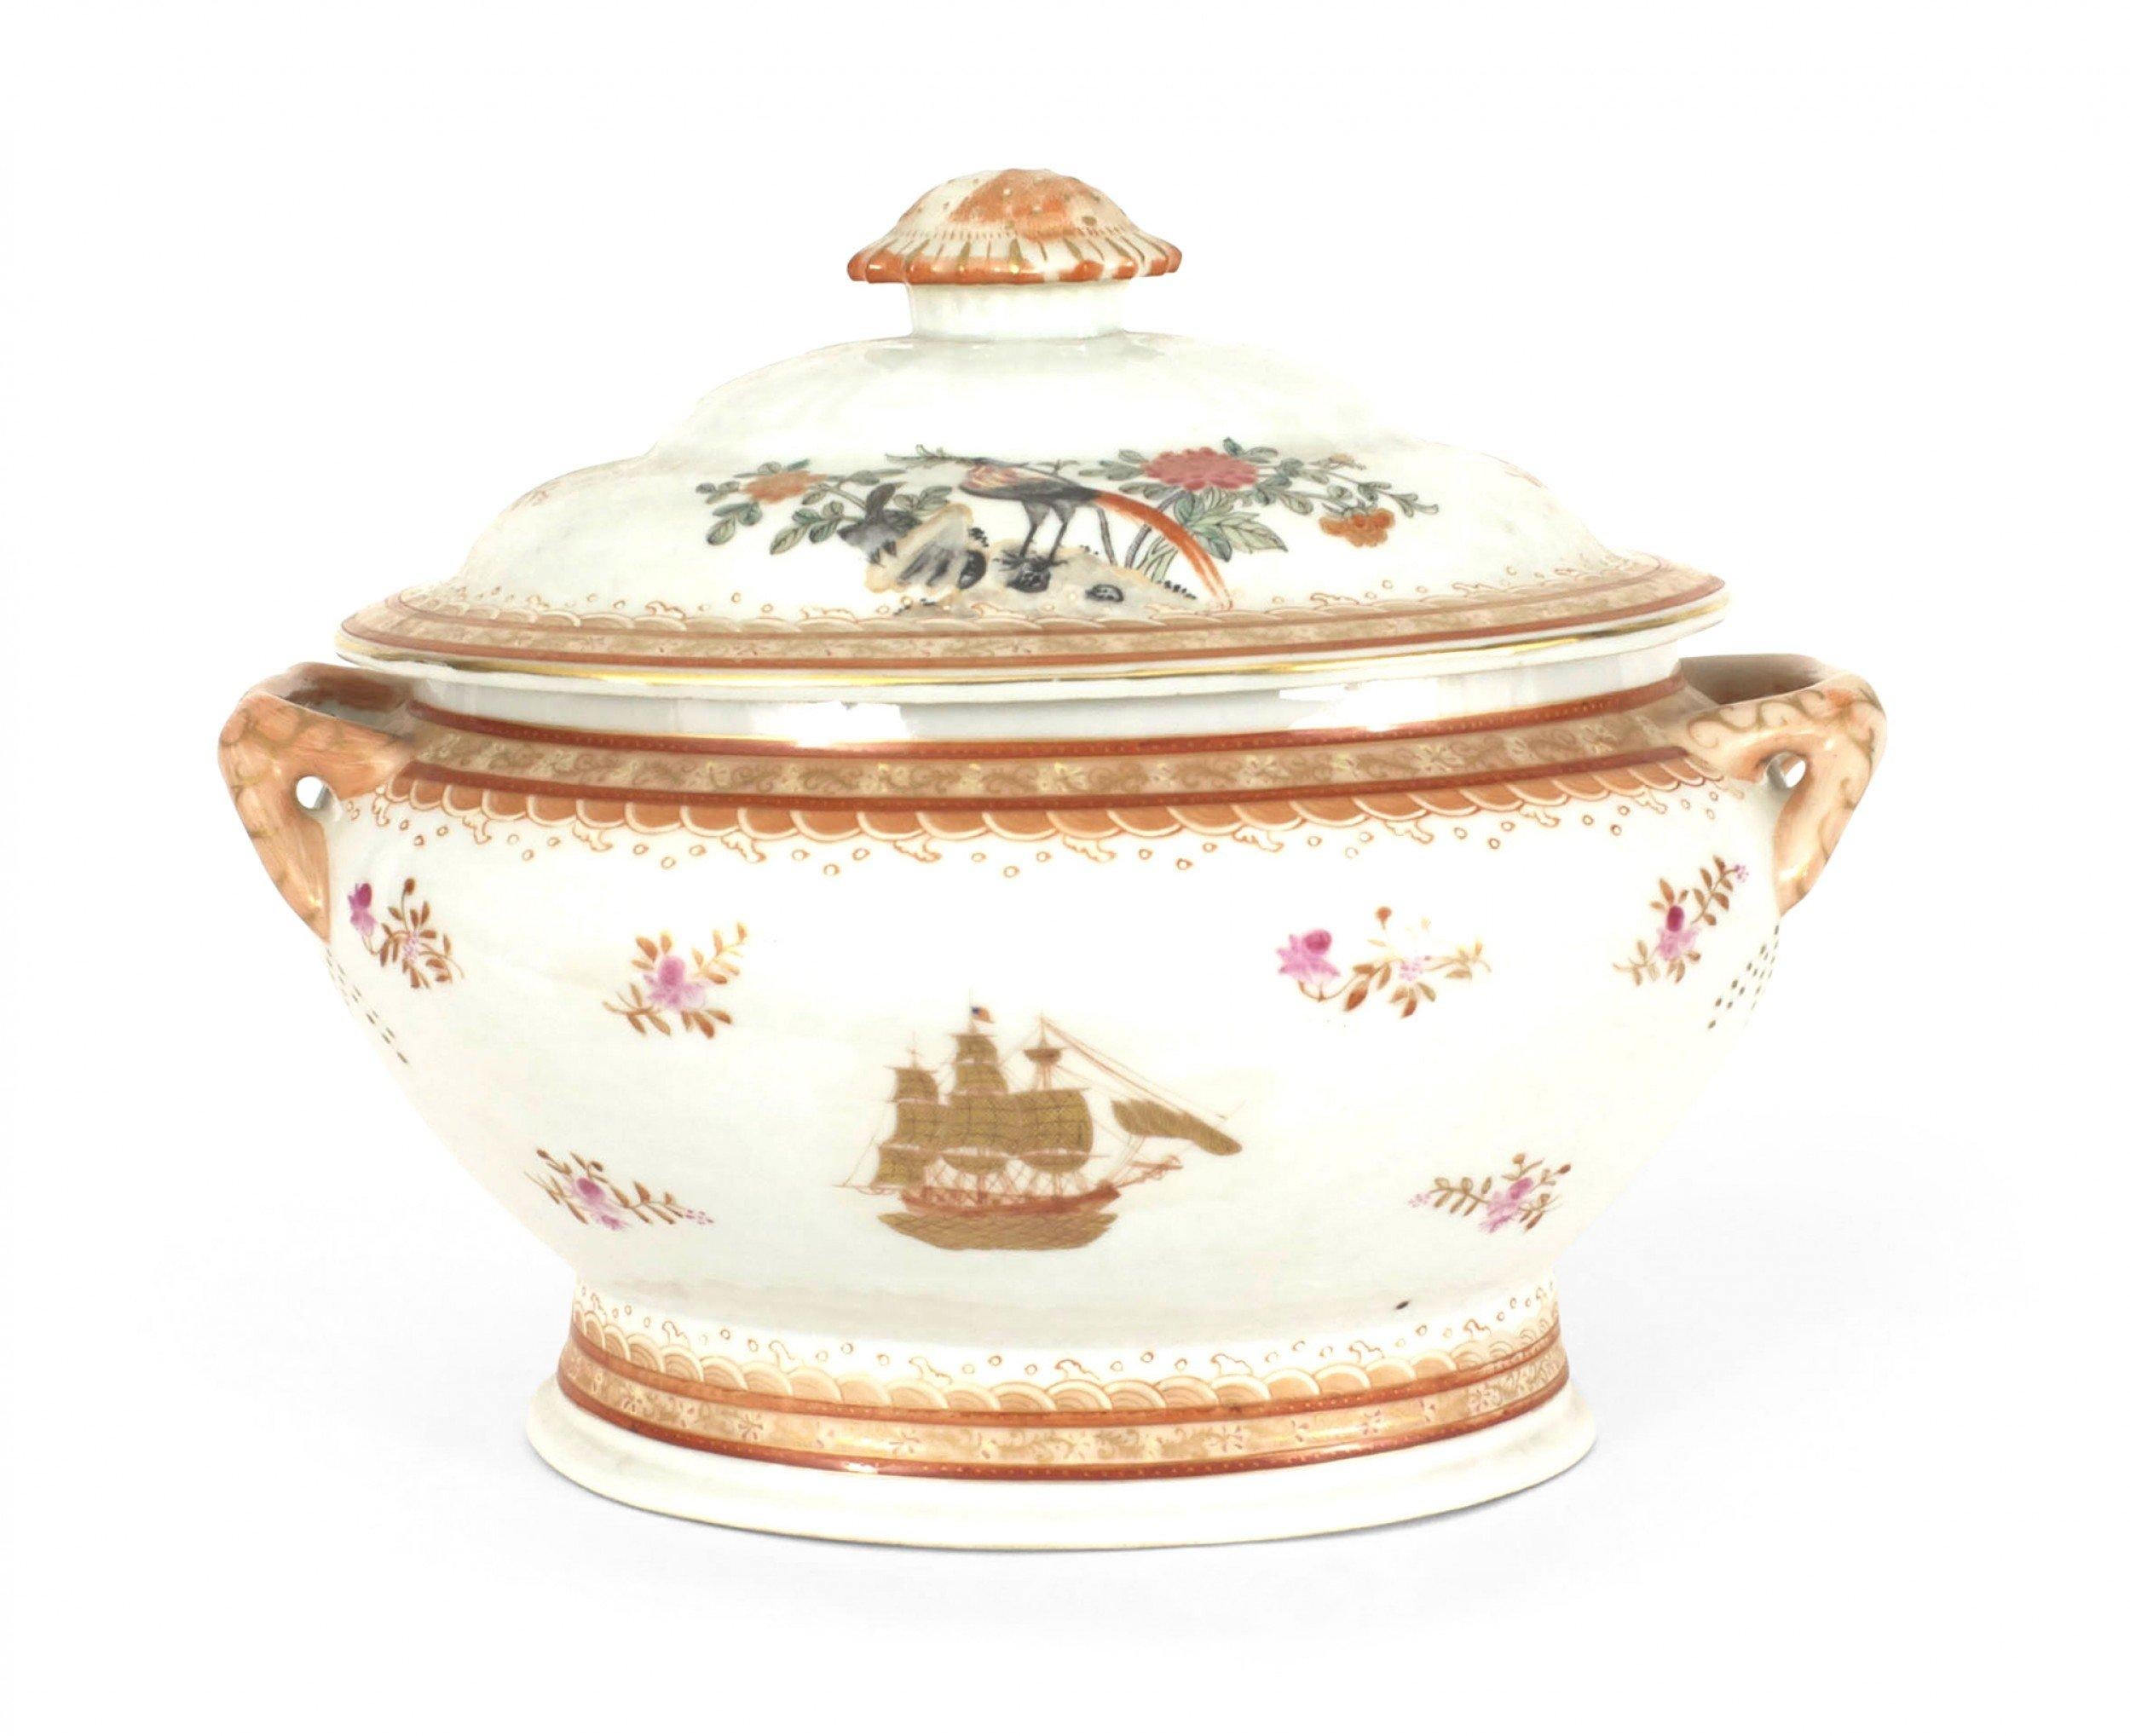 Continental (19th Century) (Chinese Export) soup tureen with cover on an associated oval tray, both decorated with birds and a 3-masted ship.